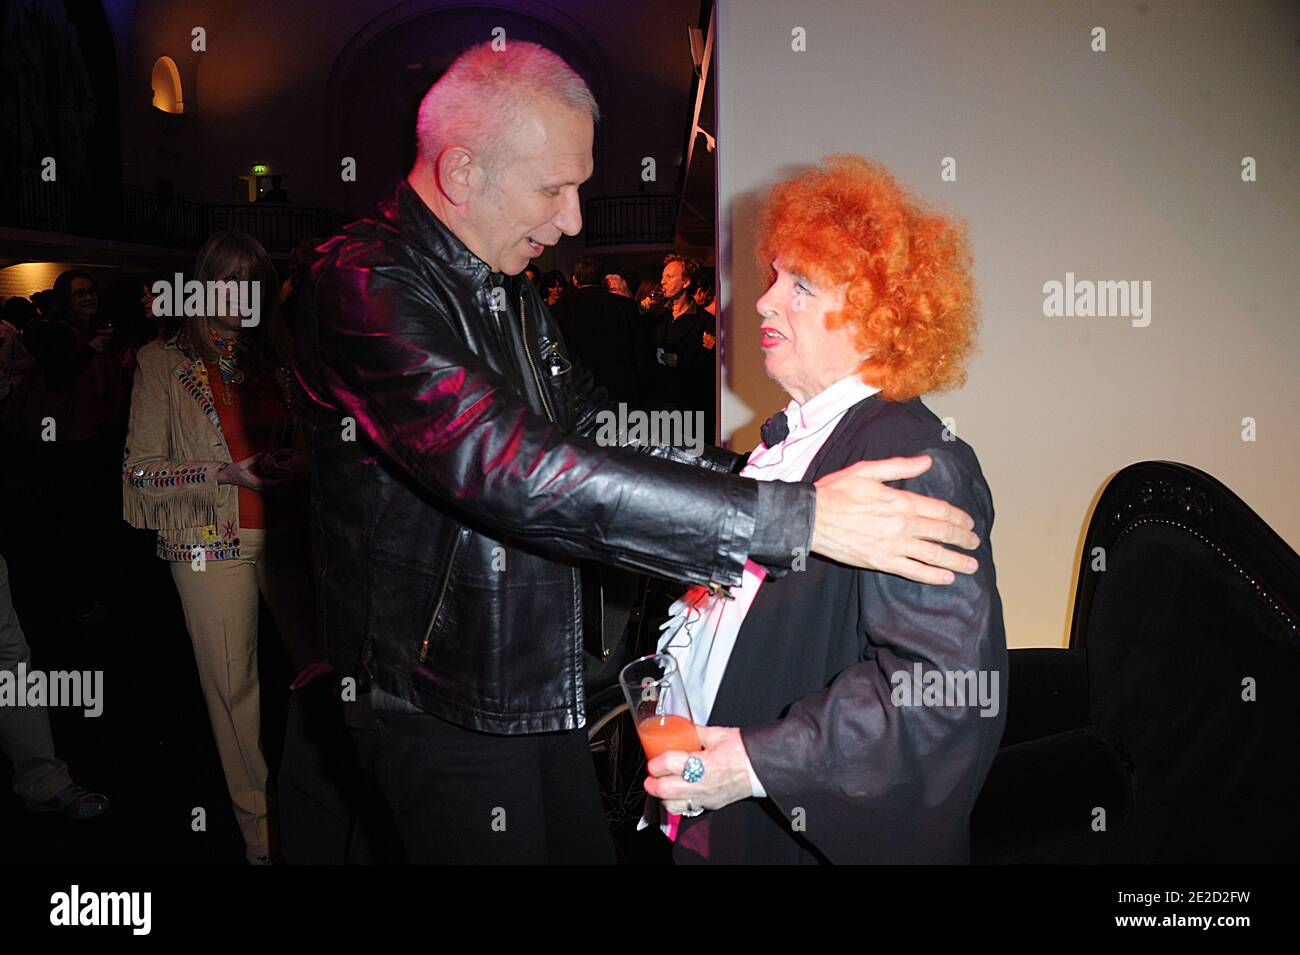 Jean-Paul Gaultier and Yvette Horner during JPG's new book 'La Planete Mode' launch party at Gaultier's headquarters in Paris, France on October 20, 2011. Photo by Giancarlo Gorassini/ABACAPRESS.COM Stock Photo